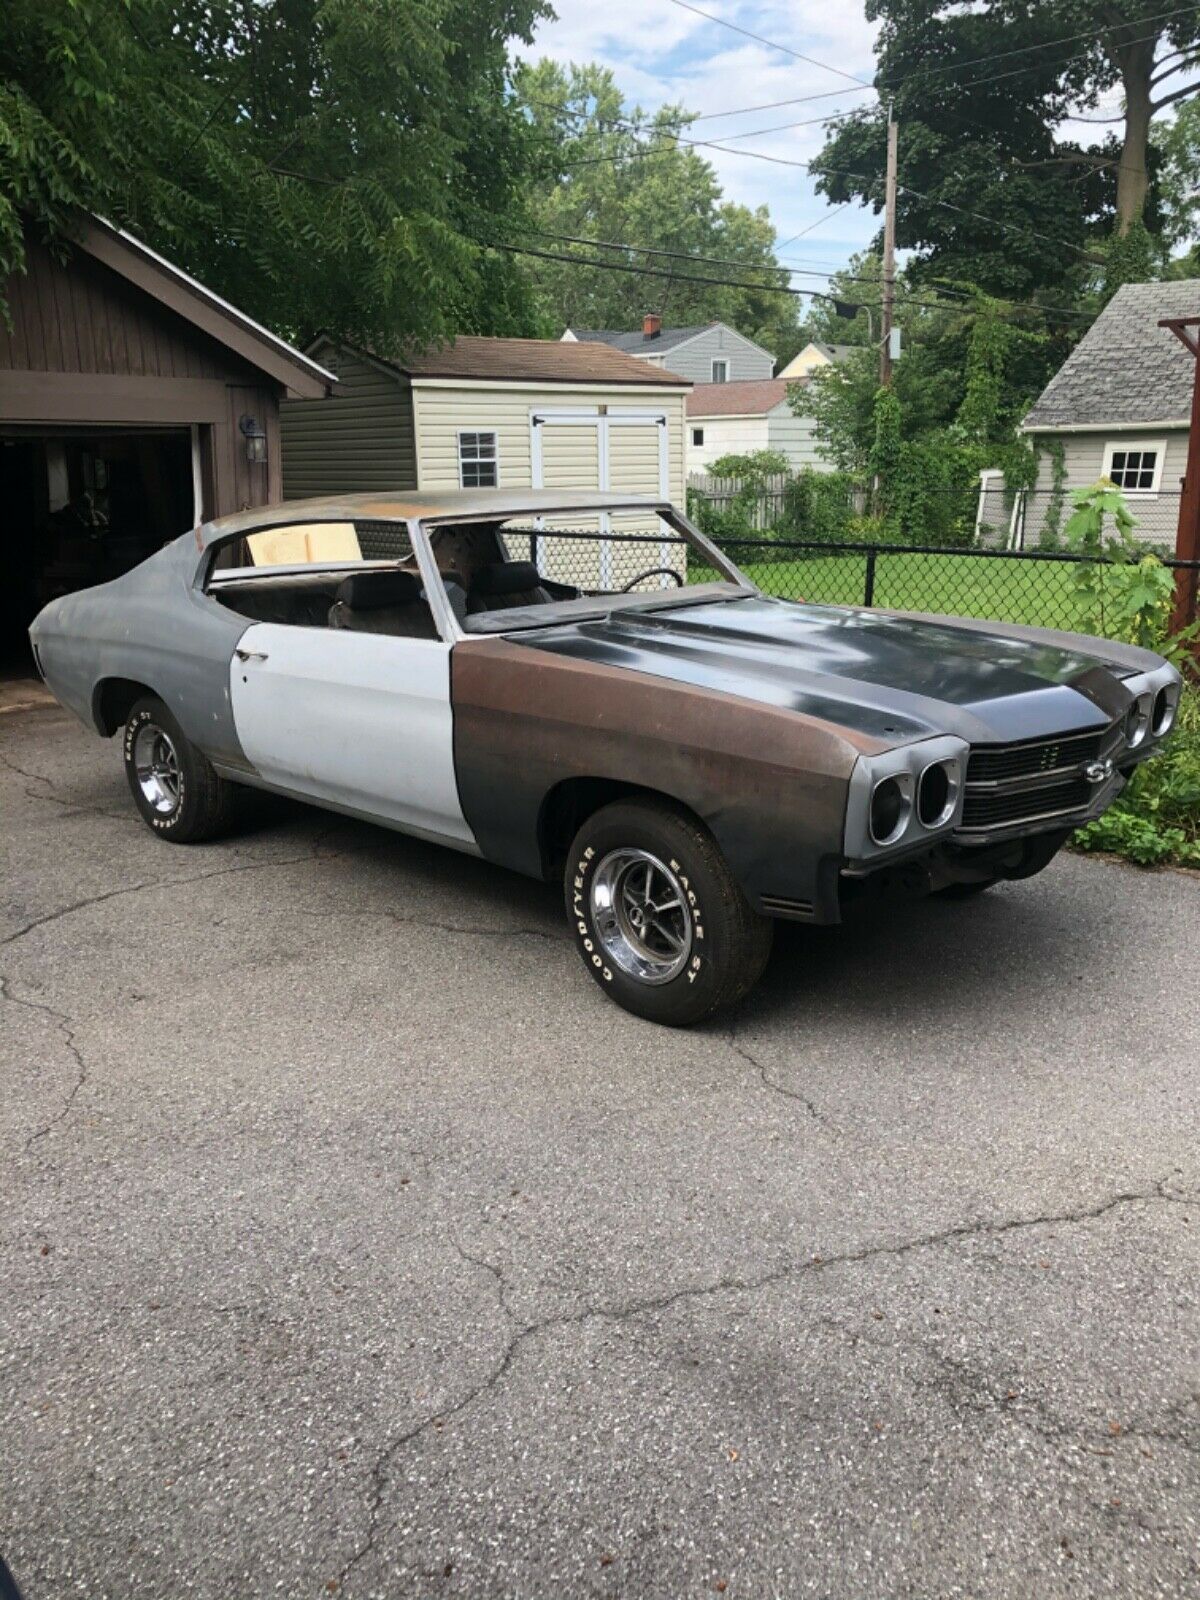 Chevelle Ss Project Car